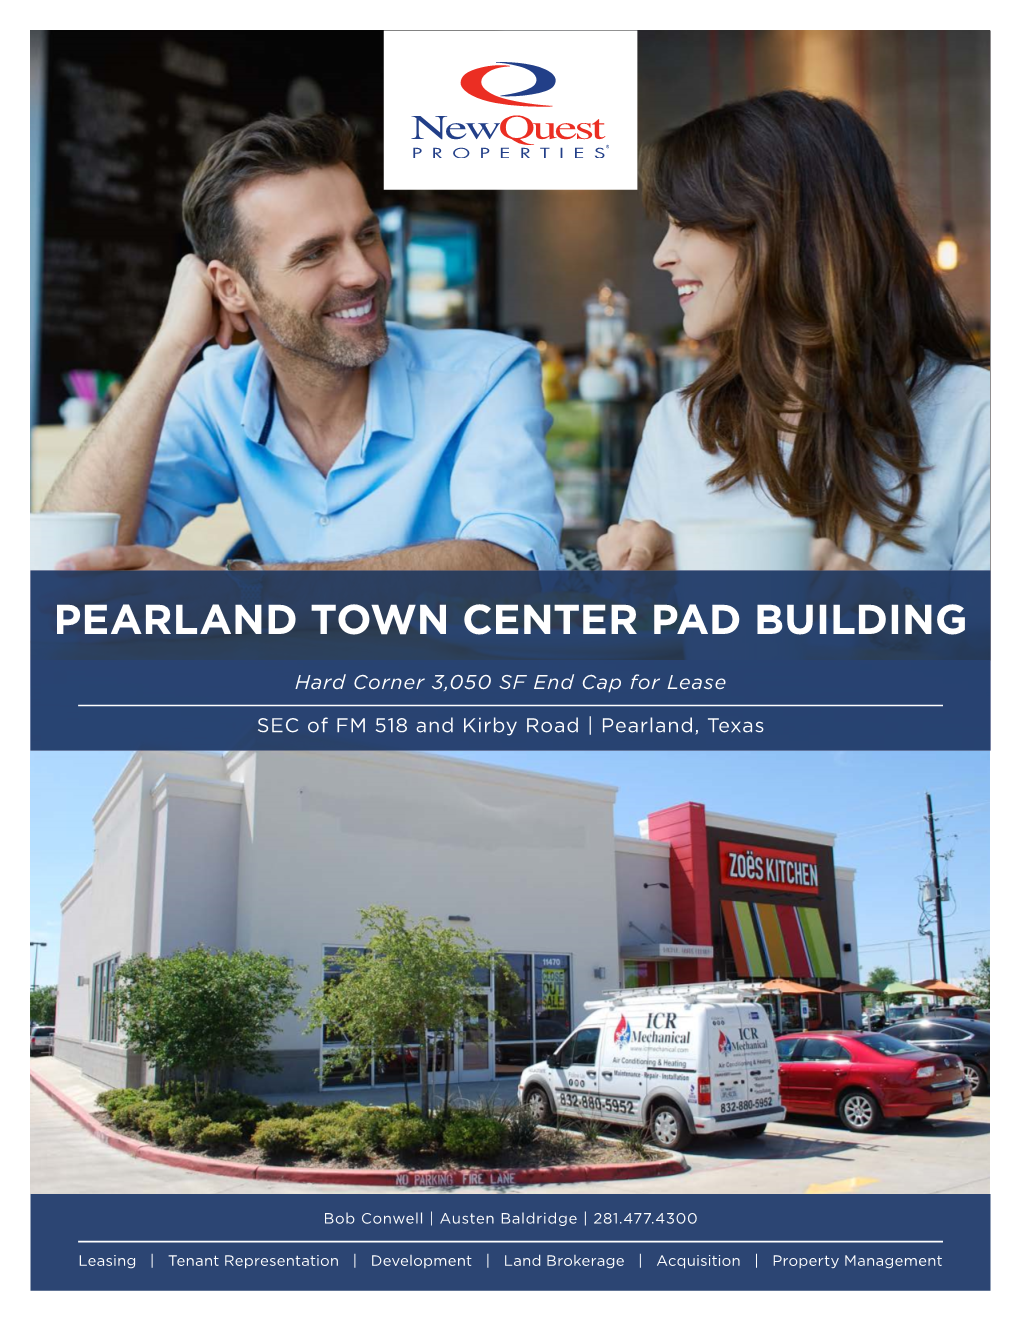 Pearland Town Center Pad Building